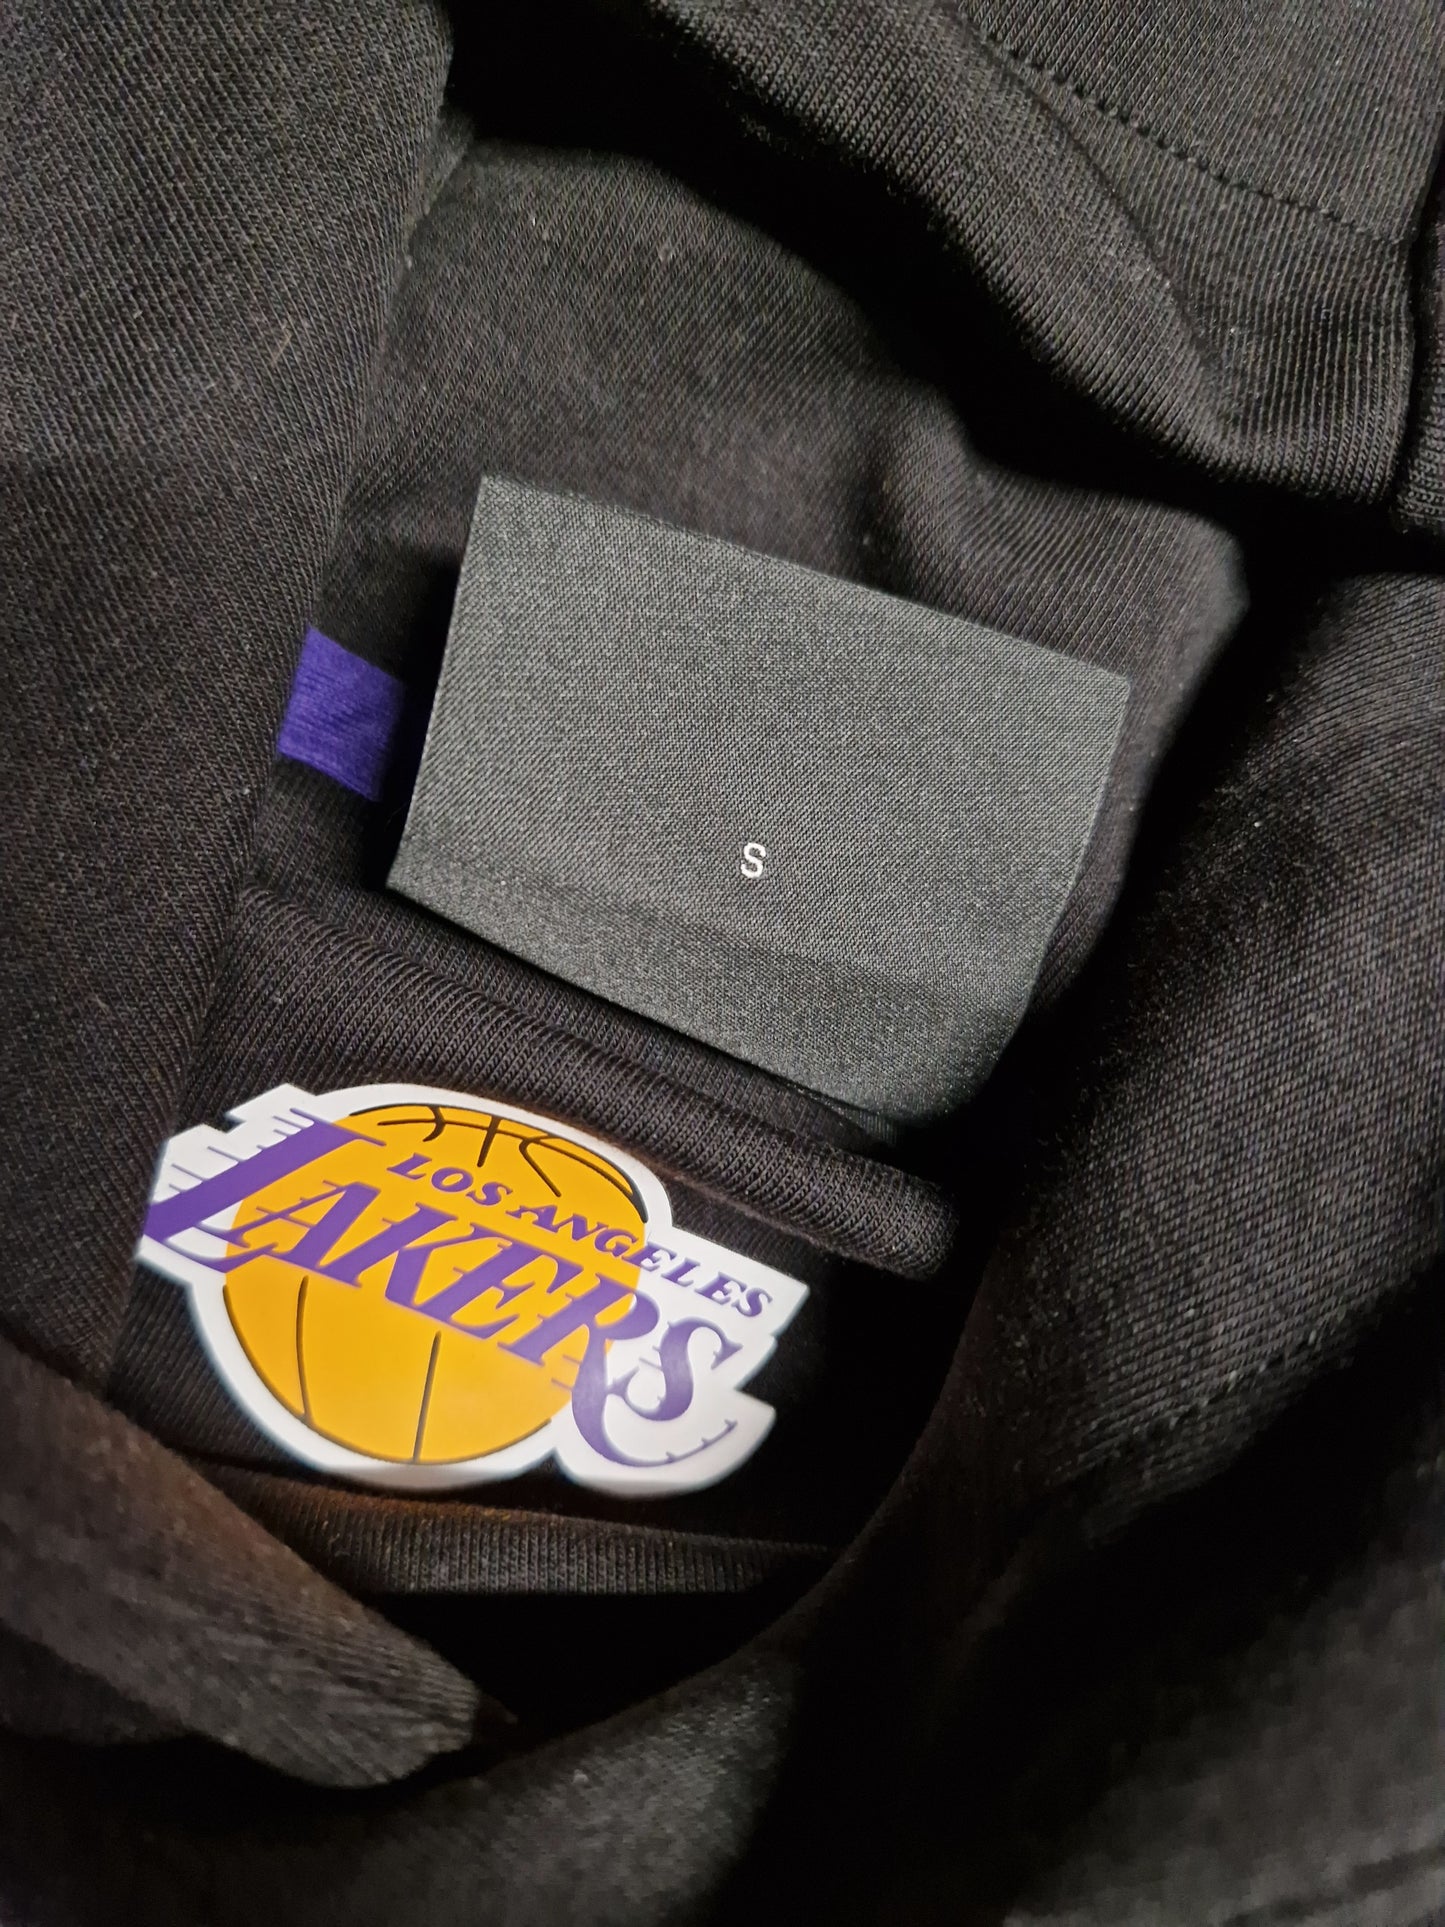 Los Angeles Lakers X Hugo Boss Sweater Hoodie Size Small